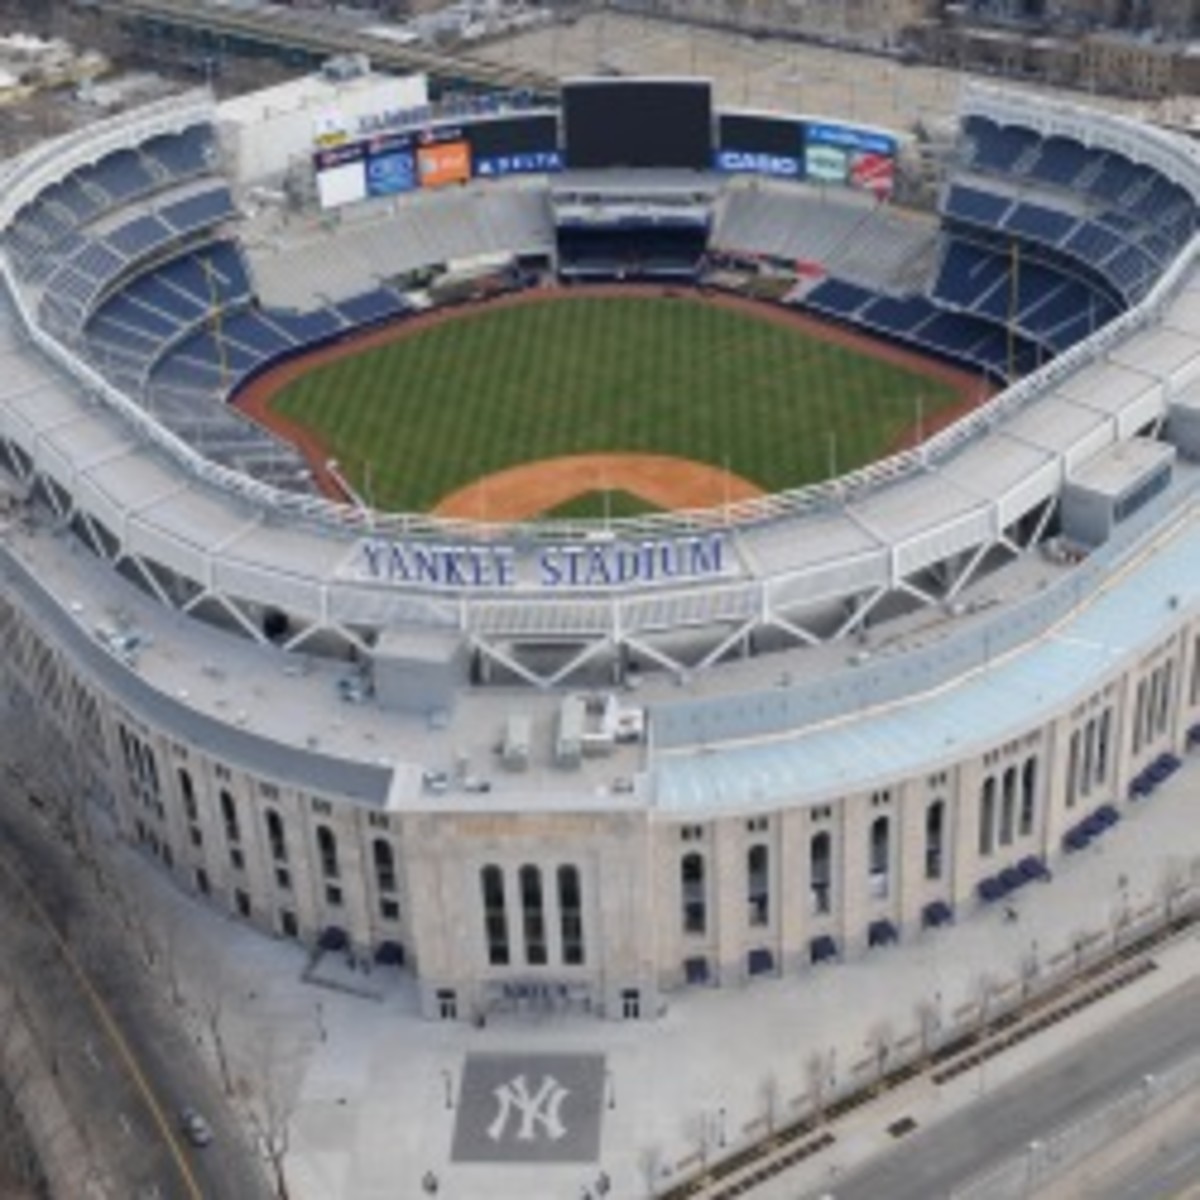 Yankee Stadium will host two outdoor NHL games in 2014. (Photo by Mark Bonifacio/NY Daily News Archive via Getty Images)